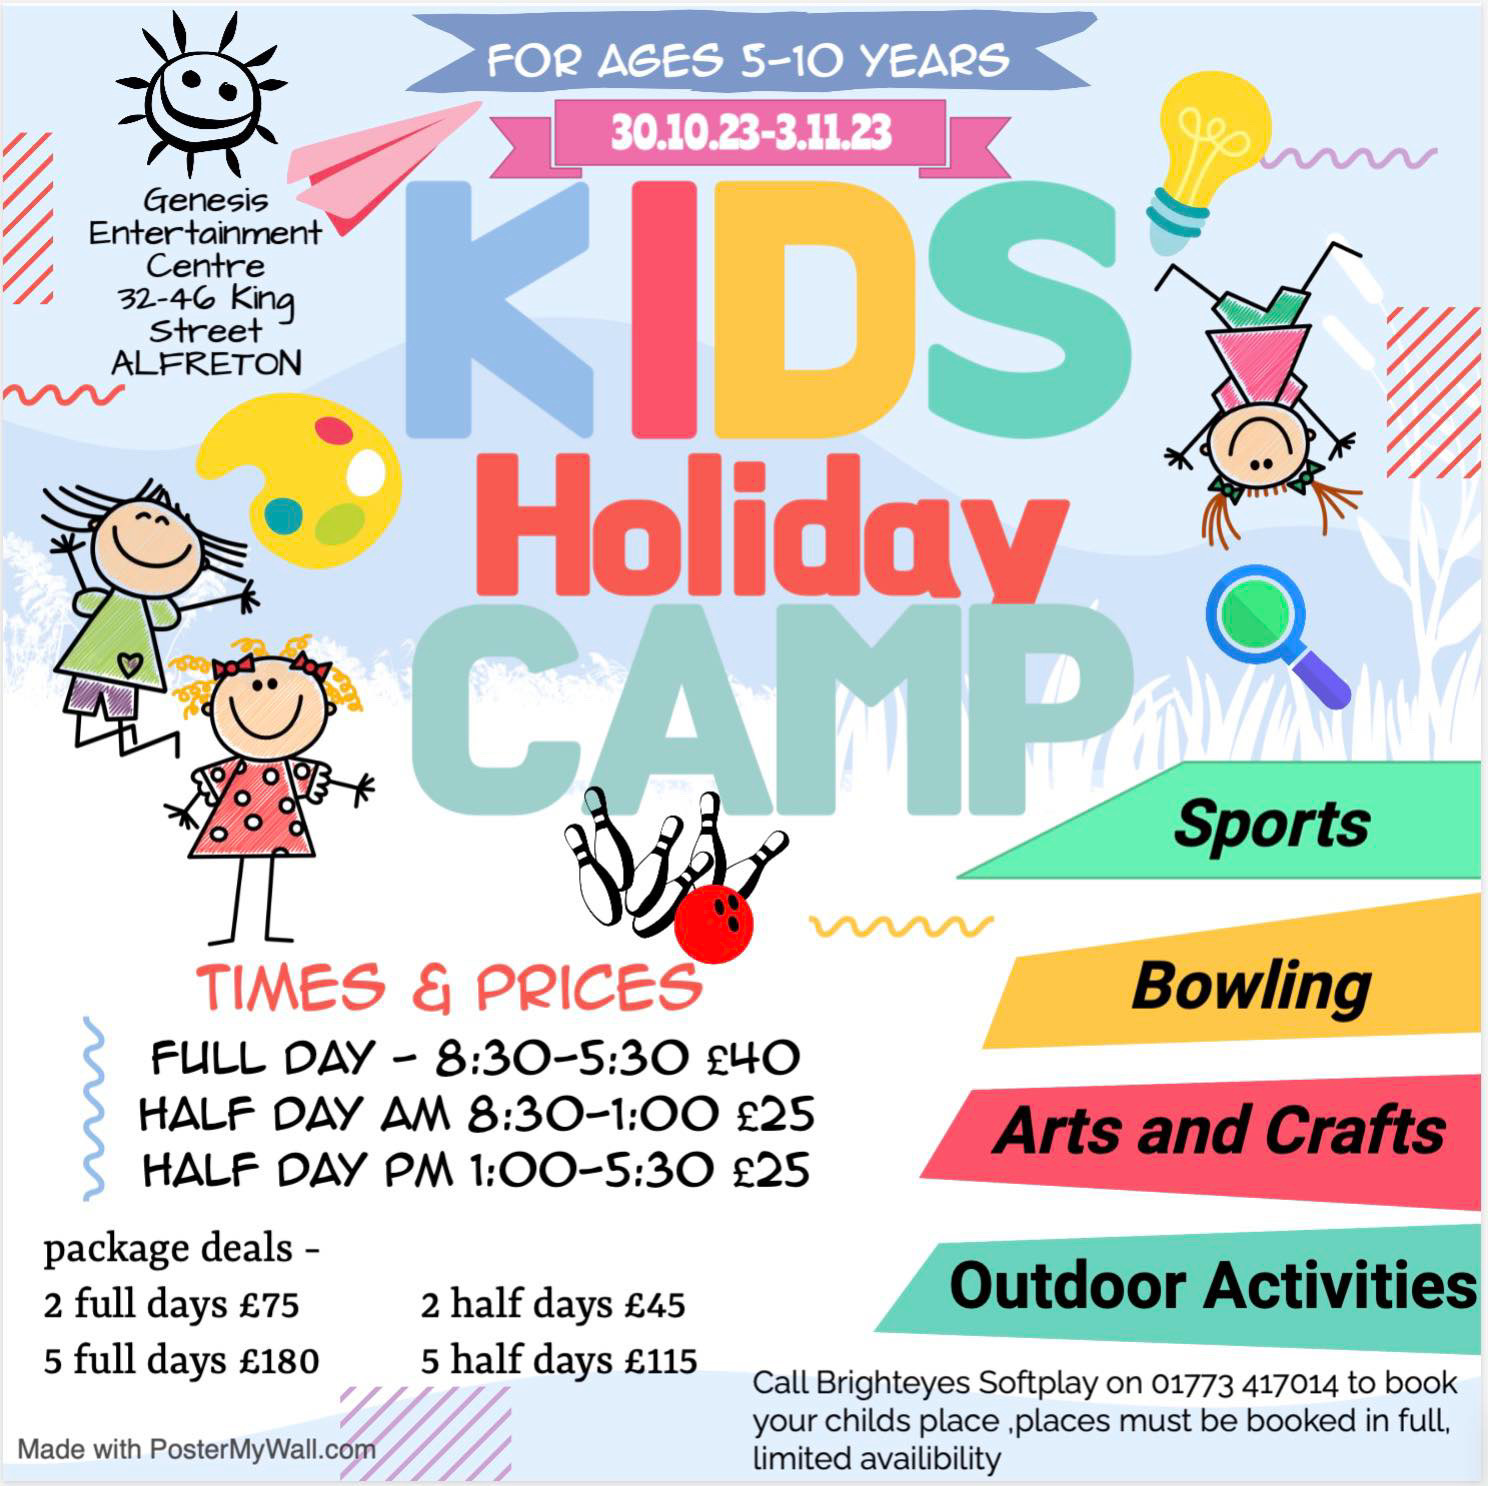 Brighteyes Softplay will host a kids holiday camp during the October half term